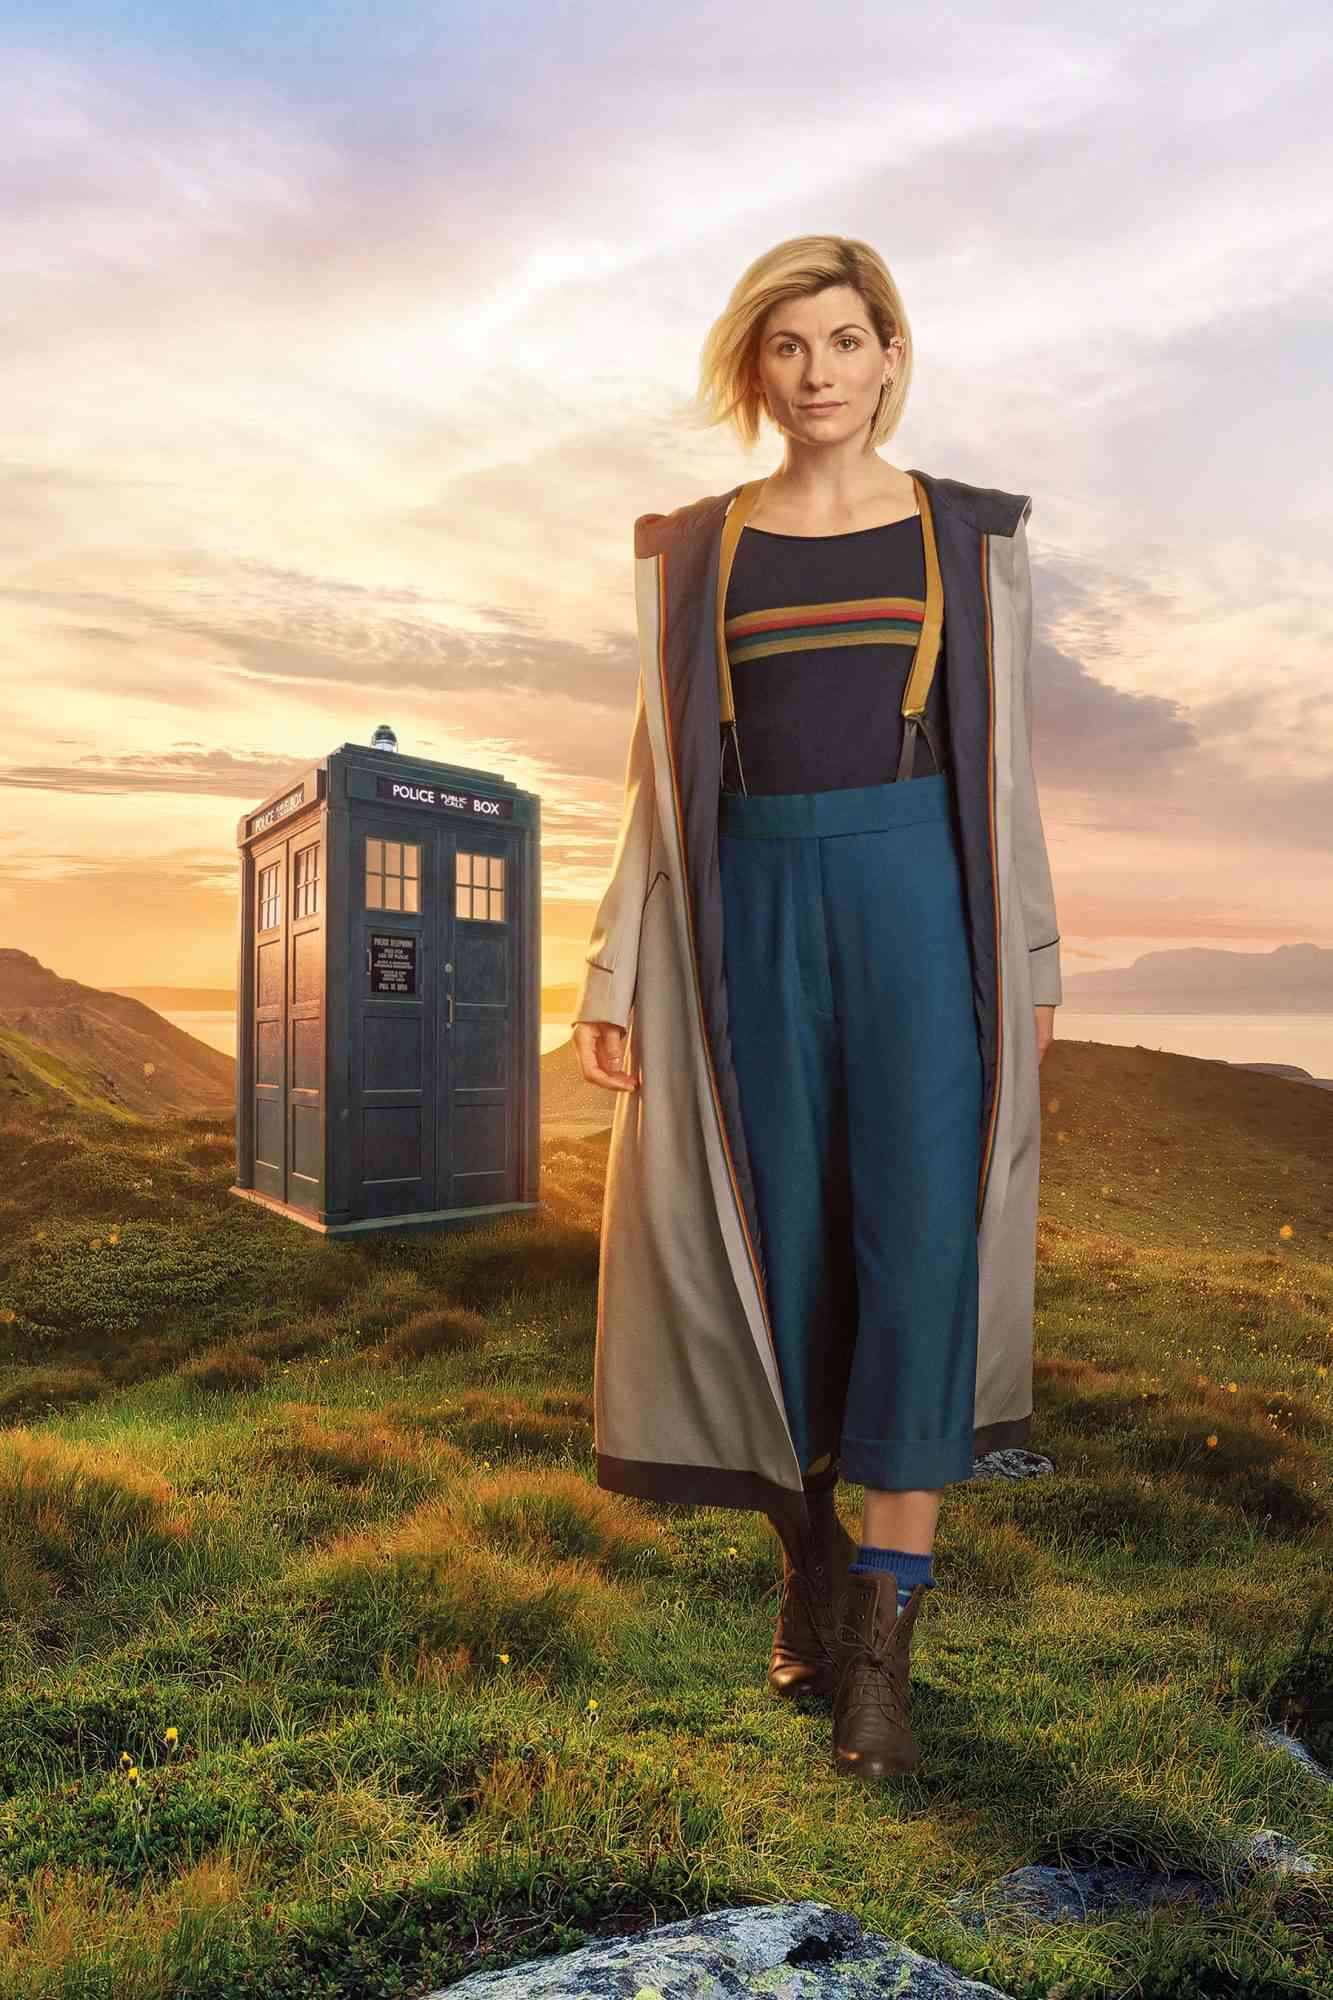 The Thirteenth Doctor,&nbsp;Doctor Who